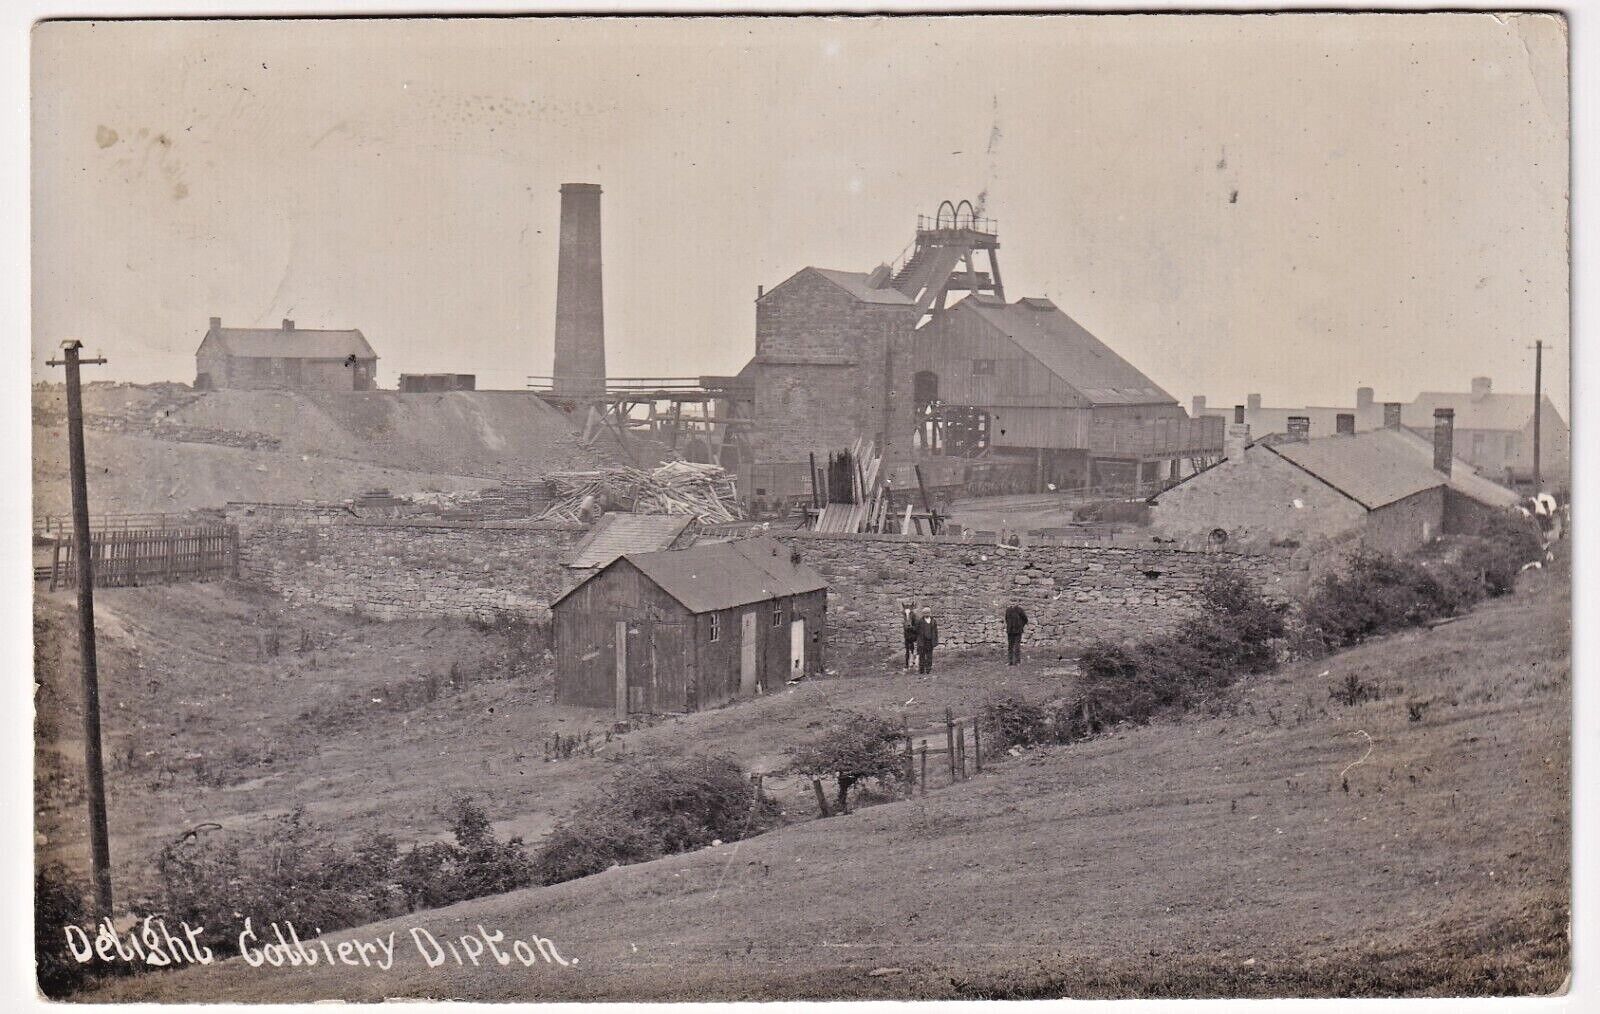 House Clearance - Delight Colliery Dipton Durham Real Photograph Service Posted Sept 13th 1909